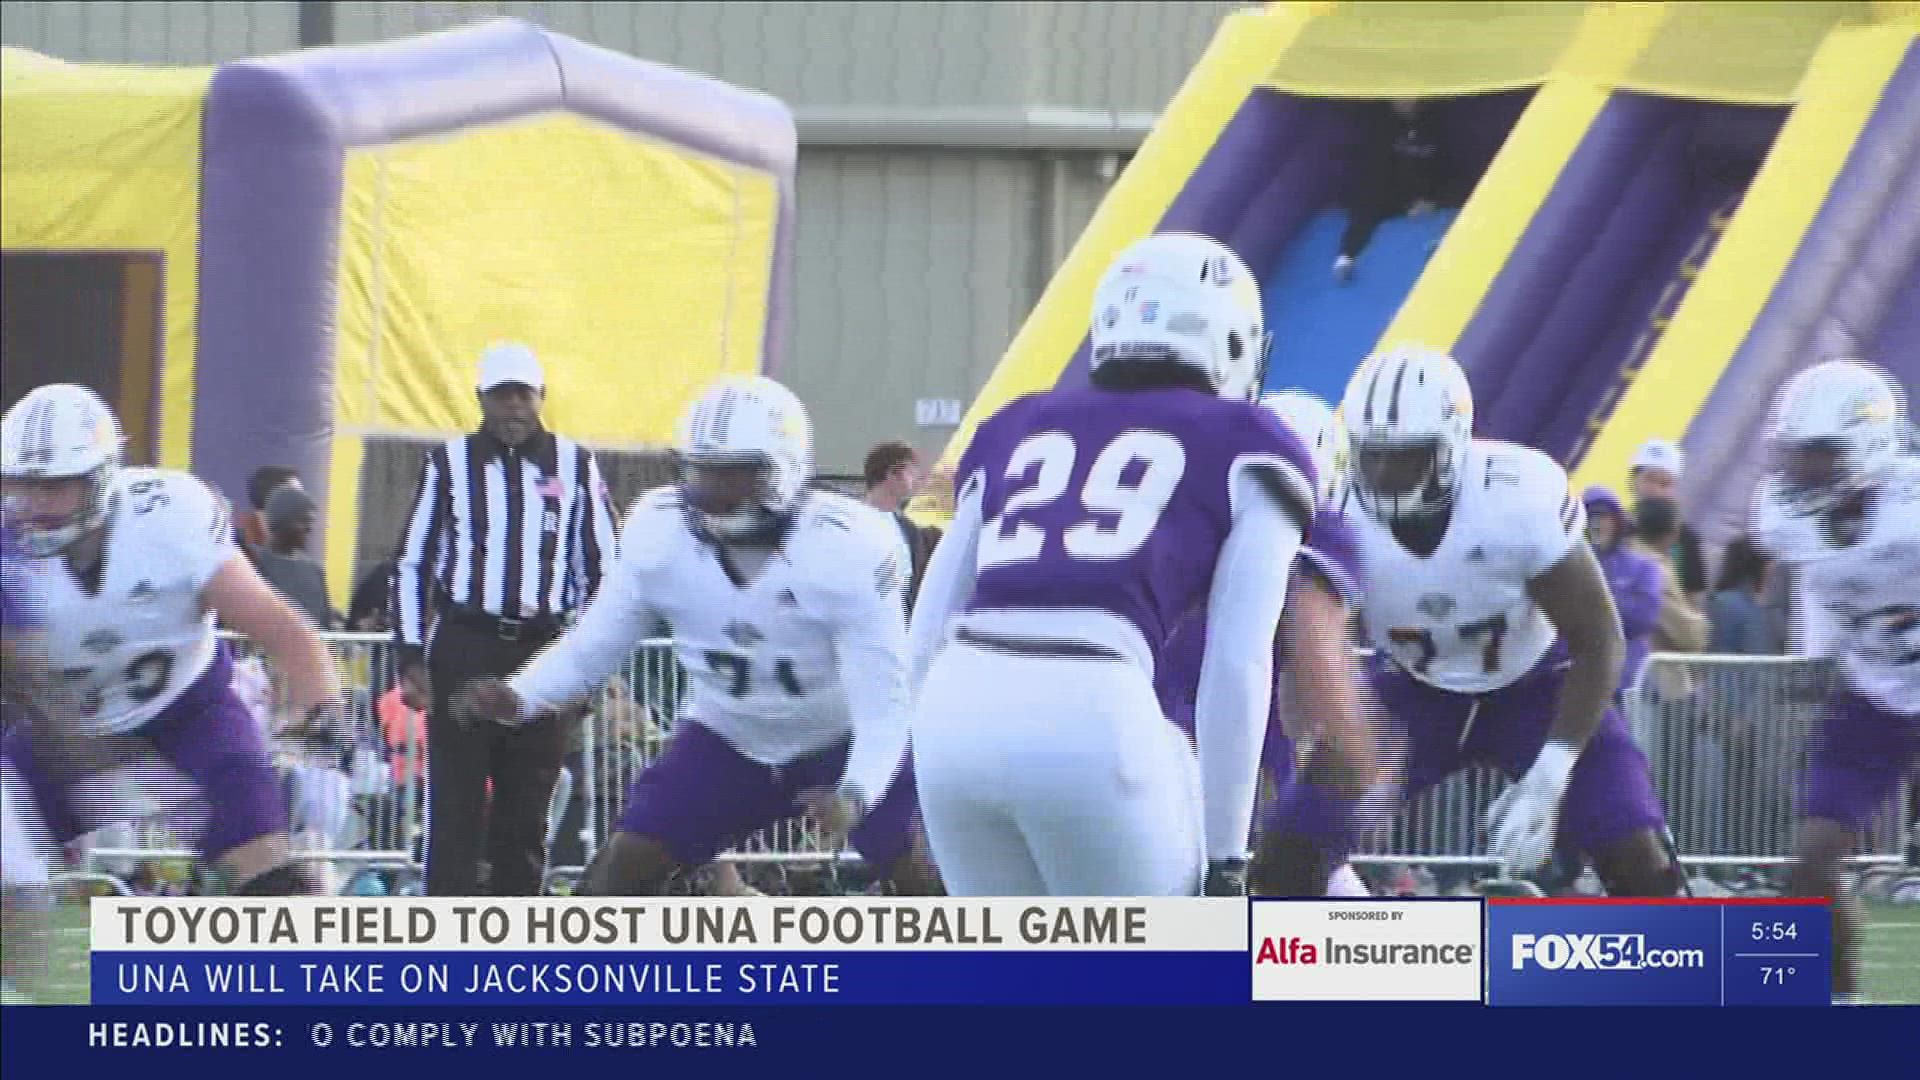 The UNA Lions football program announced partnership with Toyota Field. Team will host Jacksonville State on October 15th.